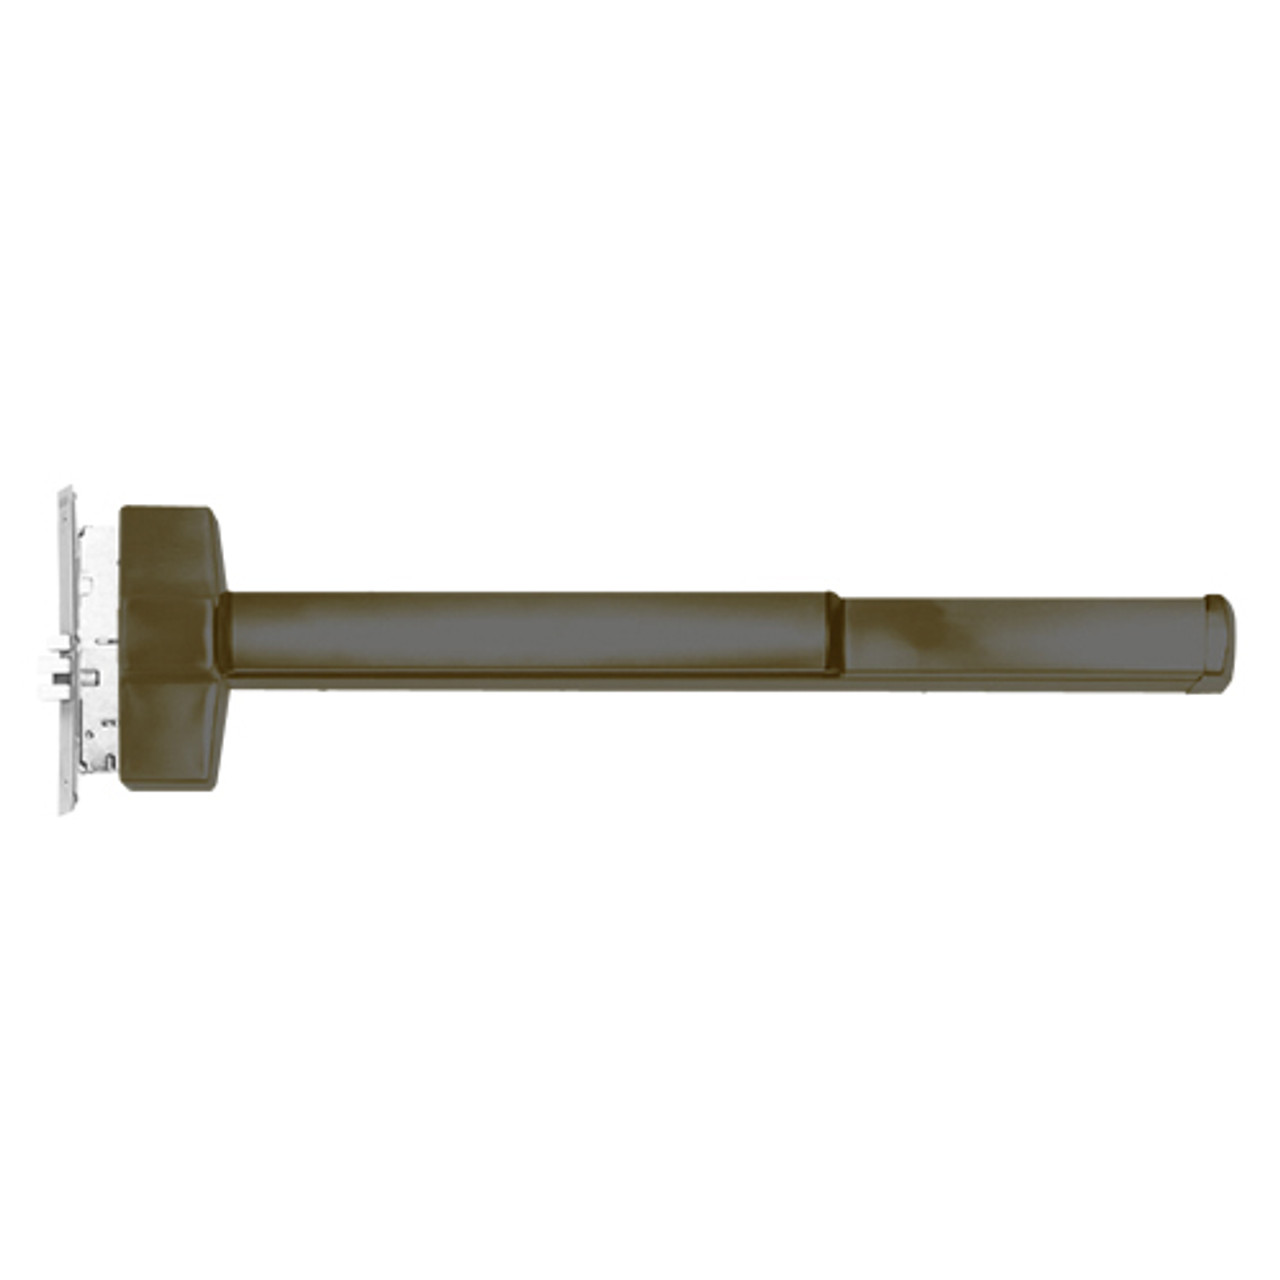 ED5657AL-613-MELR-M92-RHR Corbin ED5600 Series Fire Rated Mortise Exit Device with Motorized Latch Retraction and Touchbar Monitoring in Oil Rubbed Bronze Finish